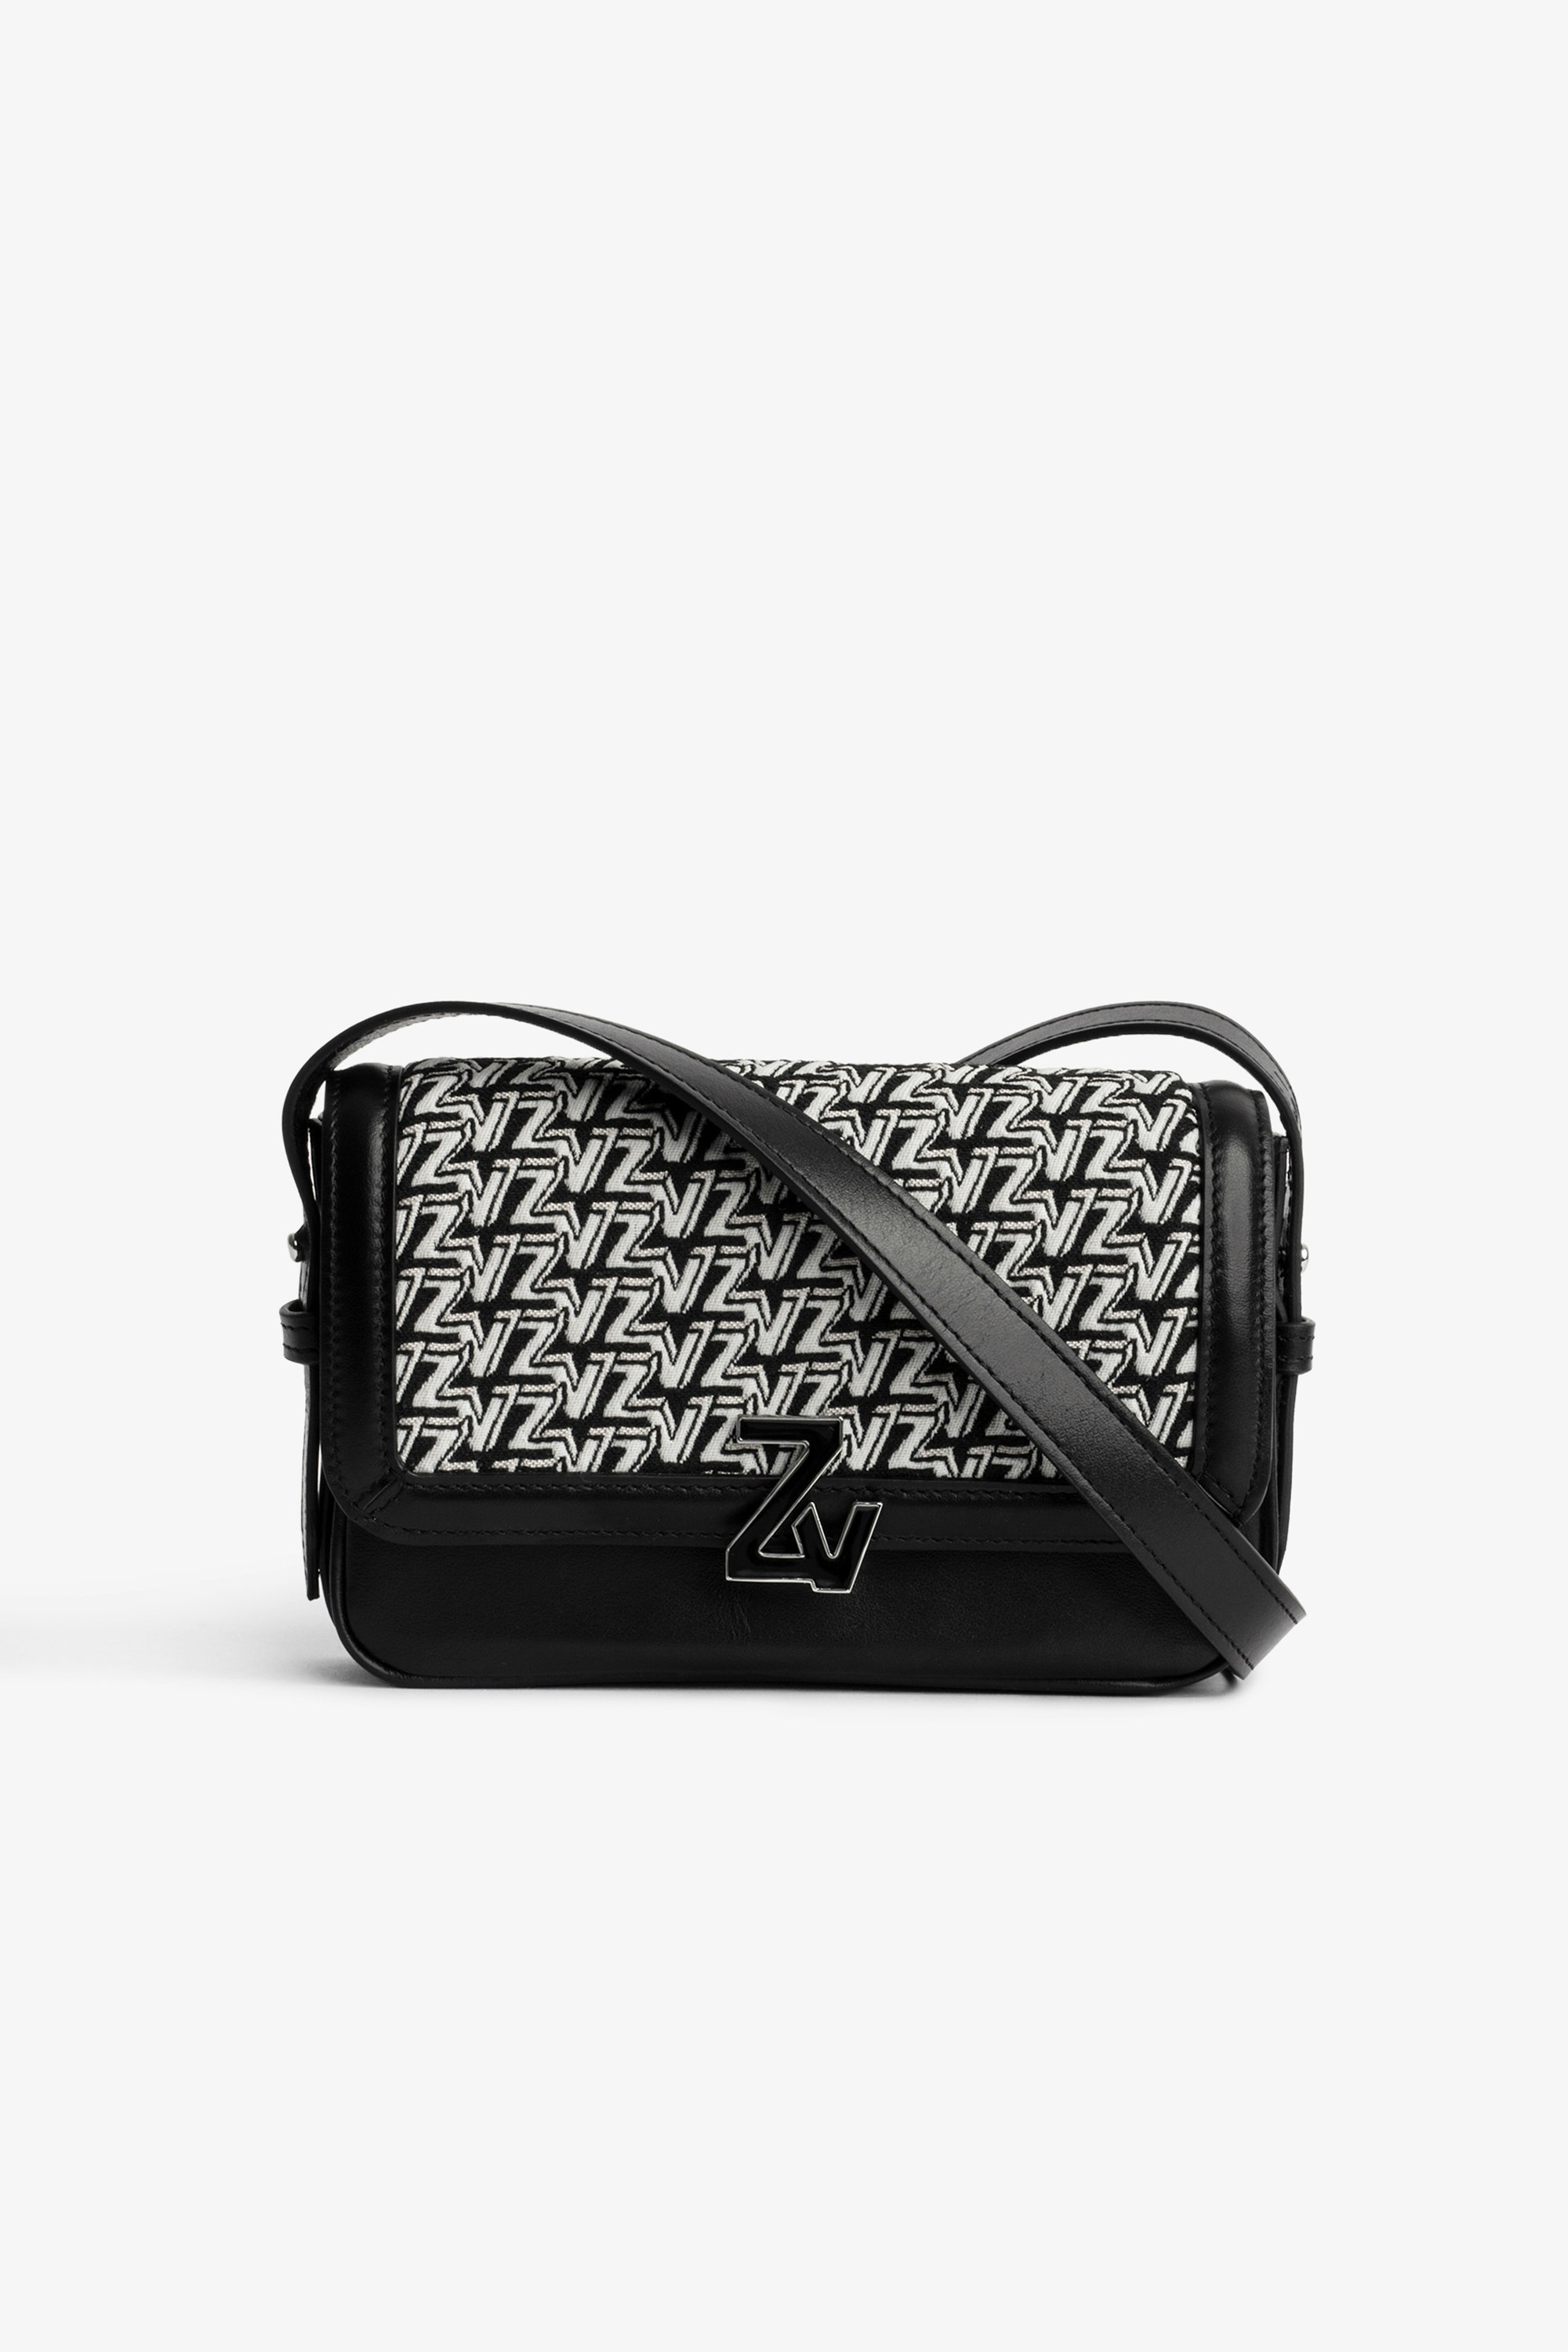 ZV Initiale Le Mini Monogram Bag Women’s mini bag in black leather and ZV jacquard with flap and shoulder strap